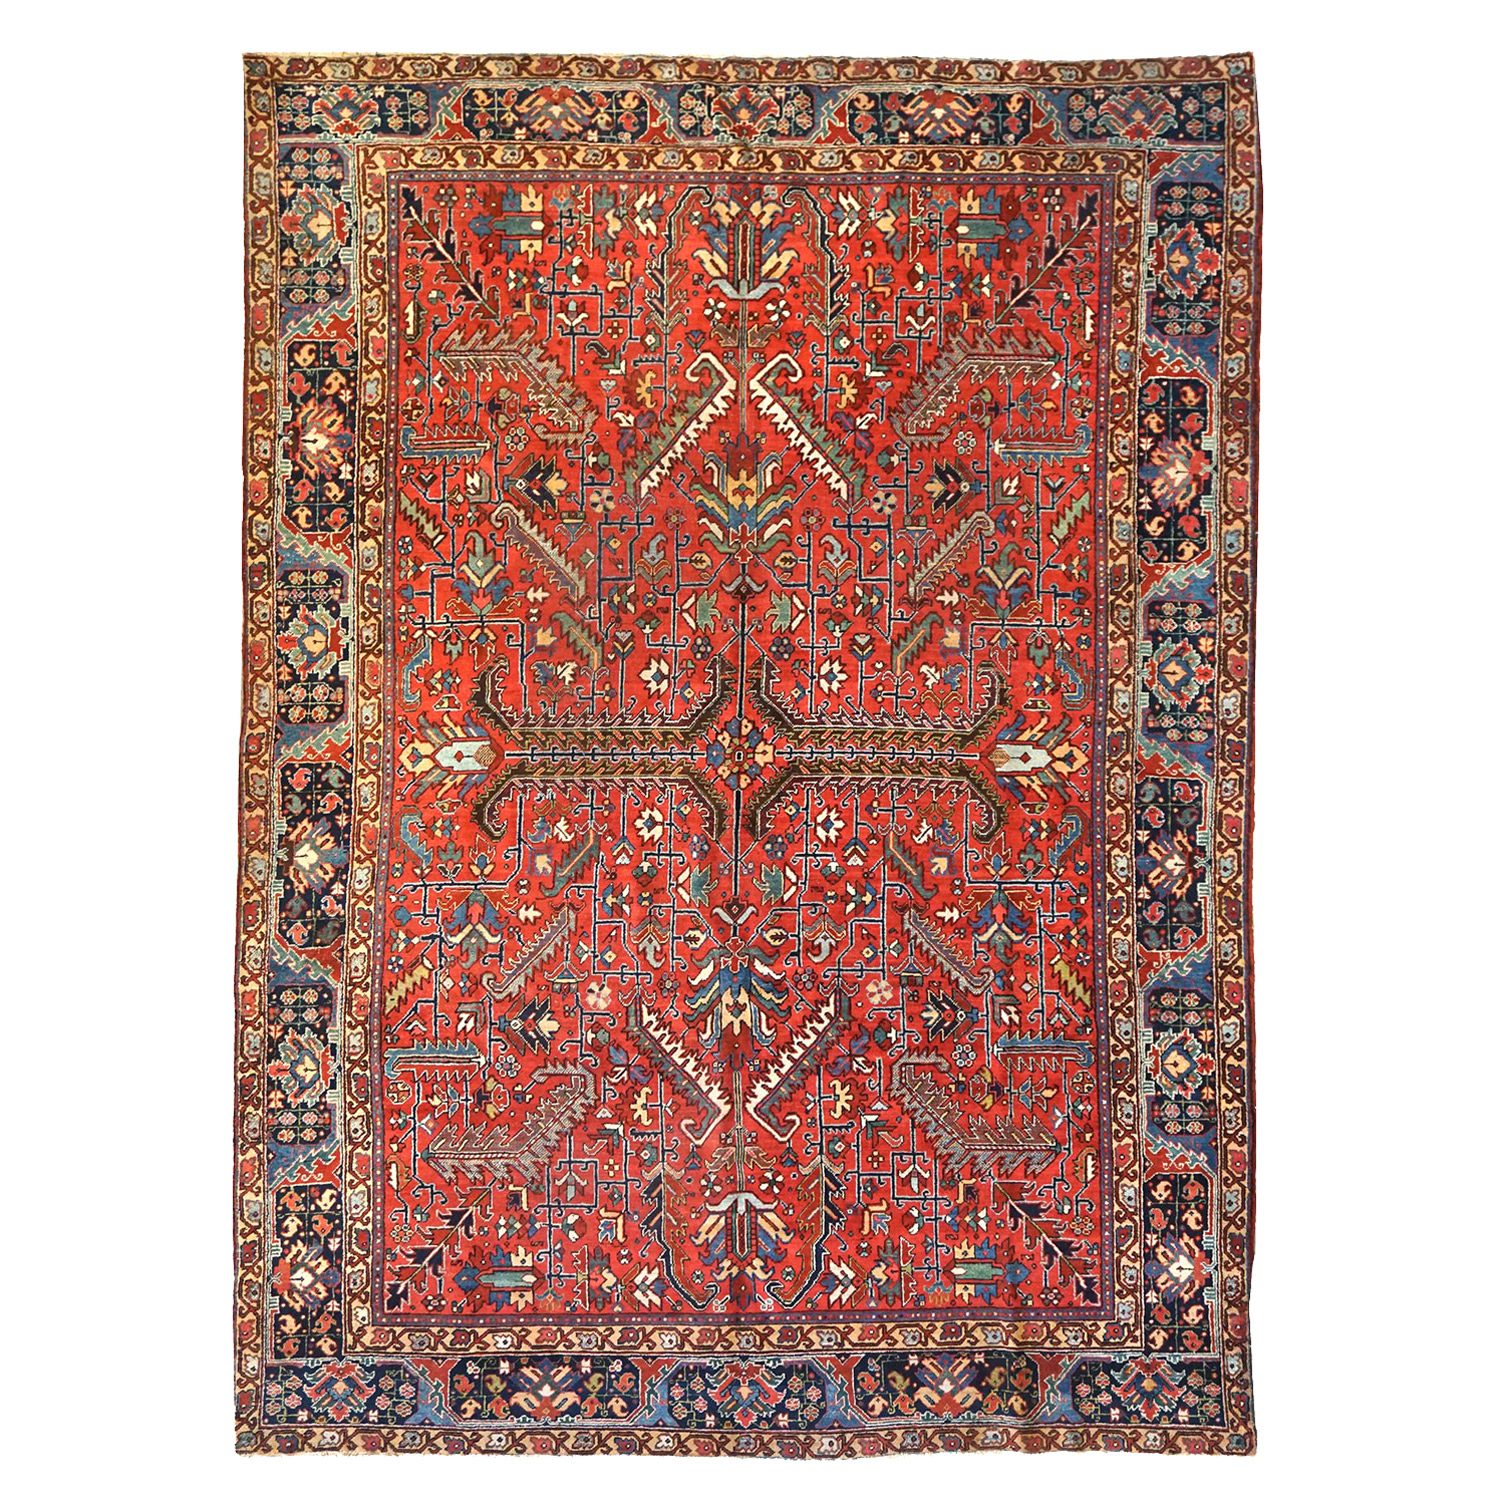 An antique Persin Heriz carpet with an all-over design of large leaves and ancillary stylized flowers on a deep salmon color field. A well drawn navy blue major border with yellow guard border frames the field. Douglas Stock Gallery, antique Persian carpets Boston,MA area - antique Oriental rugs New England- Heriz carpets